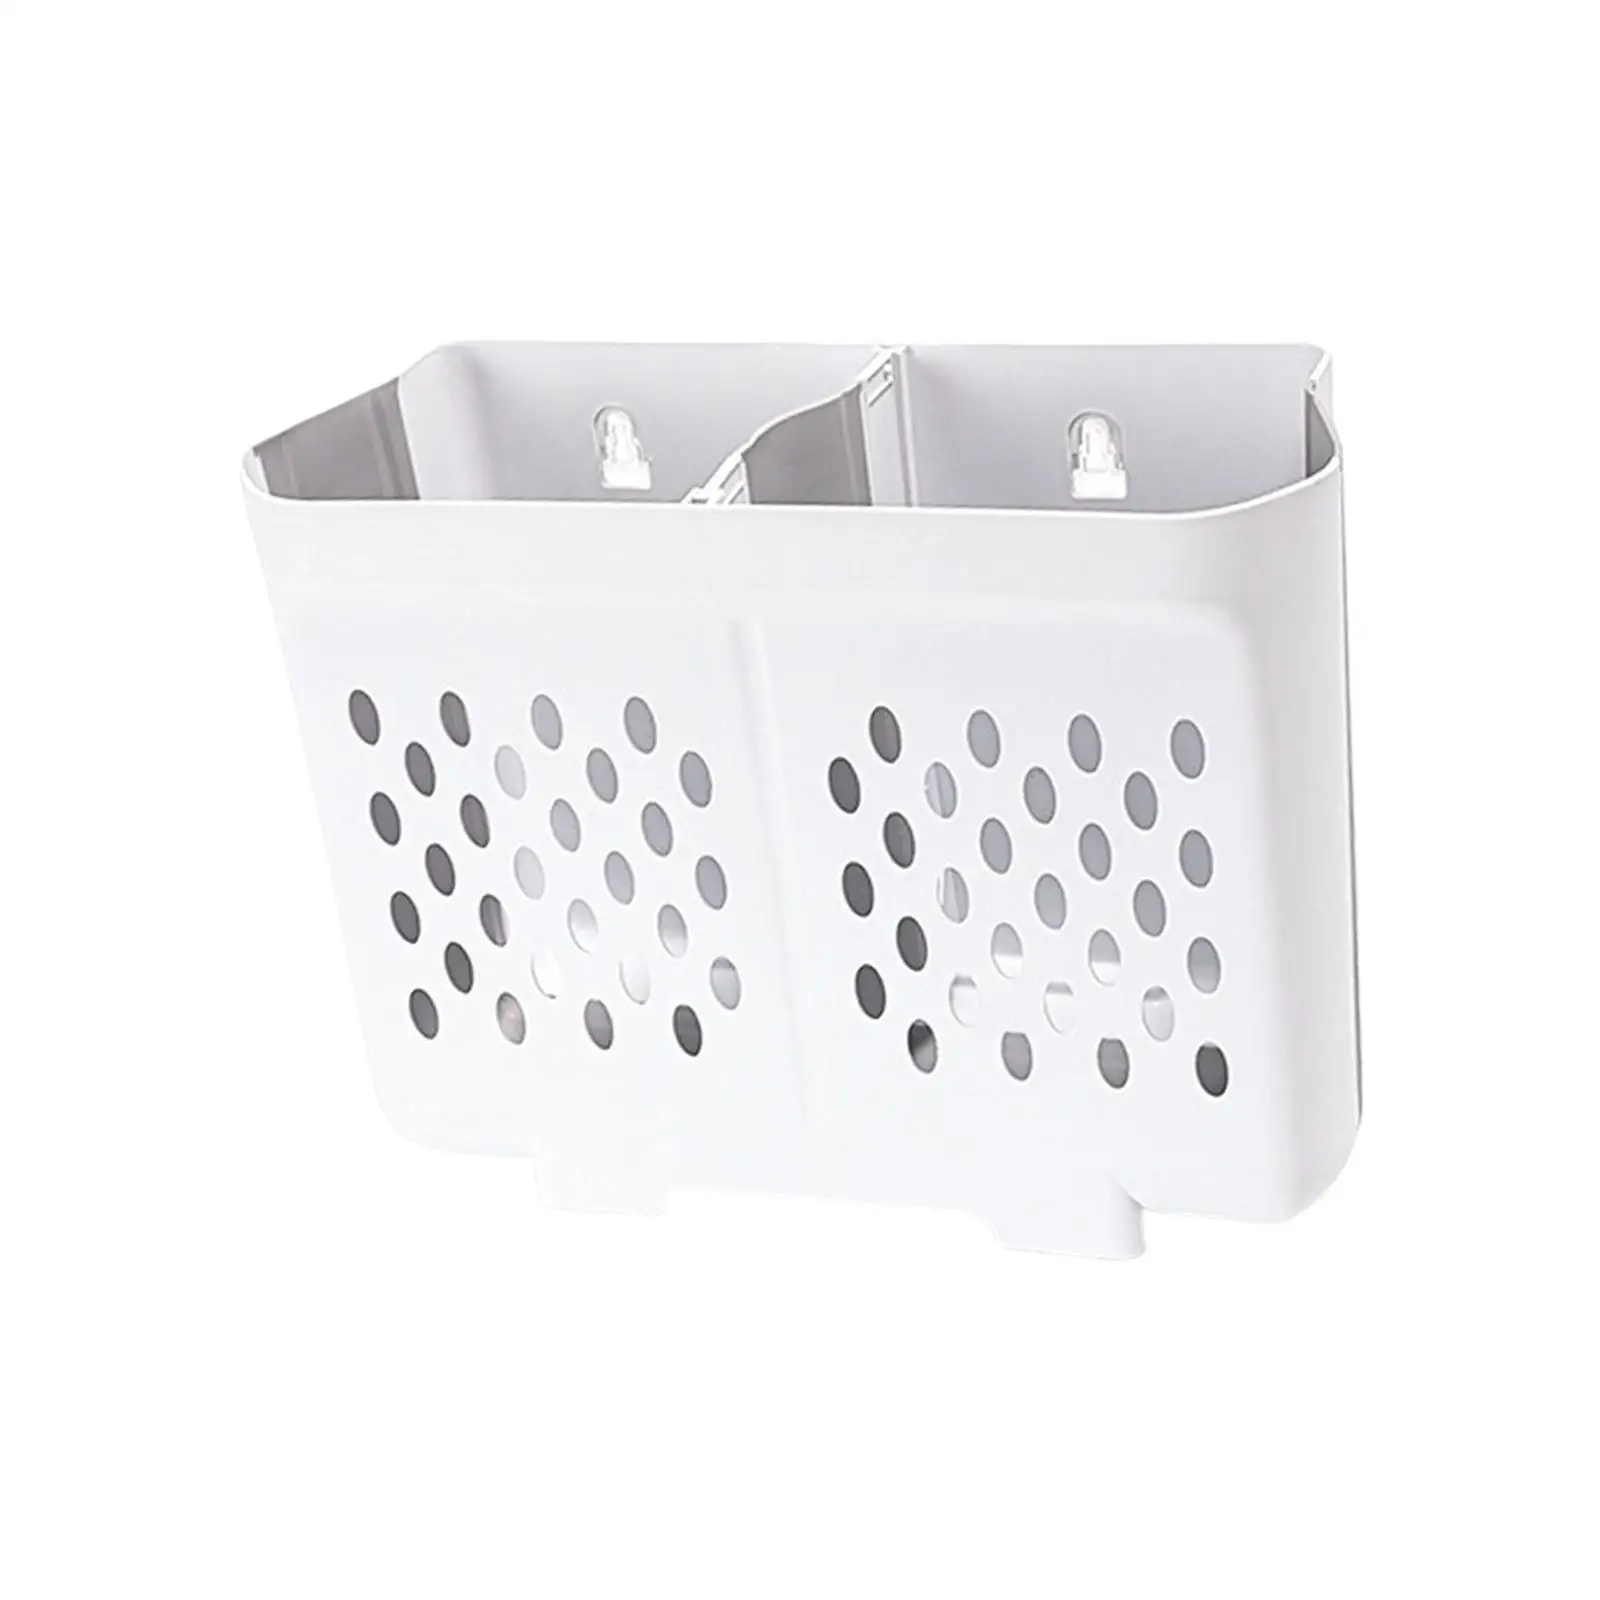 Household Foldable Laundry Hamper Organizer Hanging Hollowed Out Durable for Apartments, Hotel Use, Utility Room Sturdy